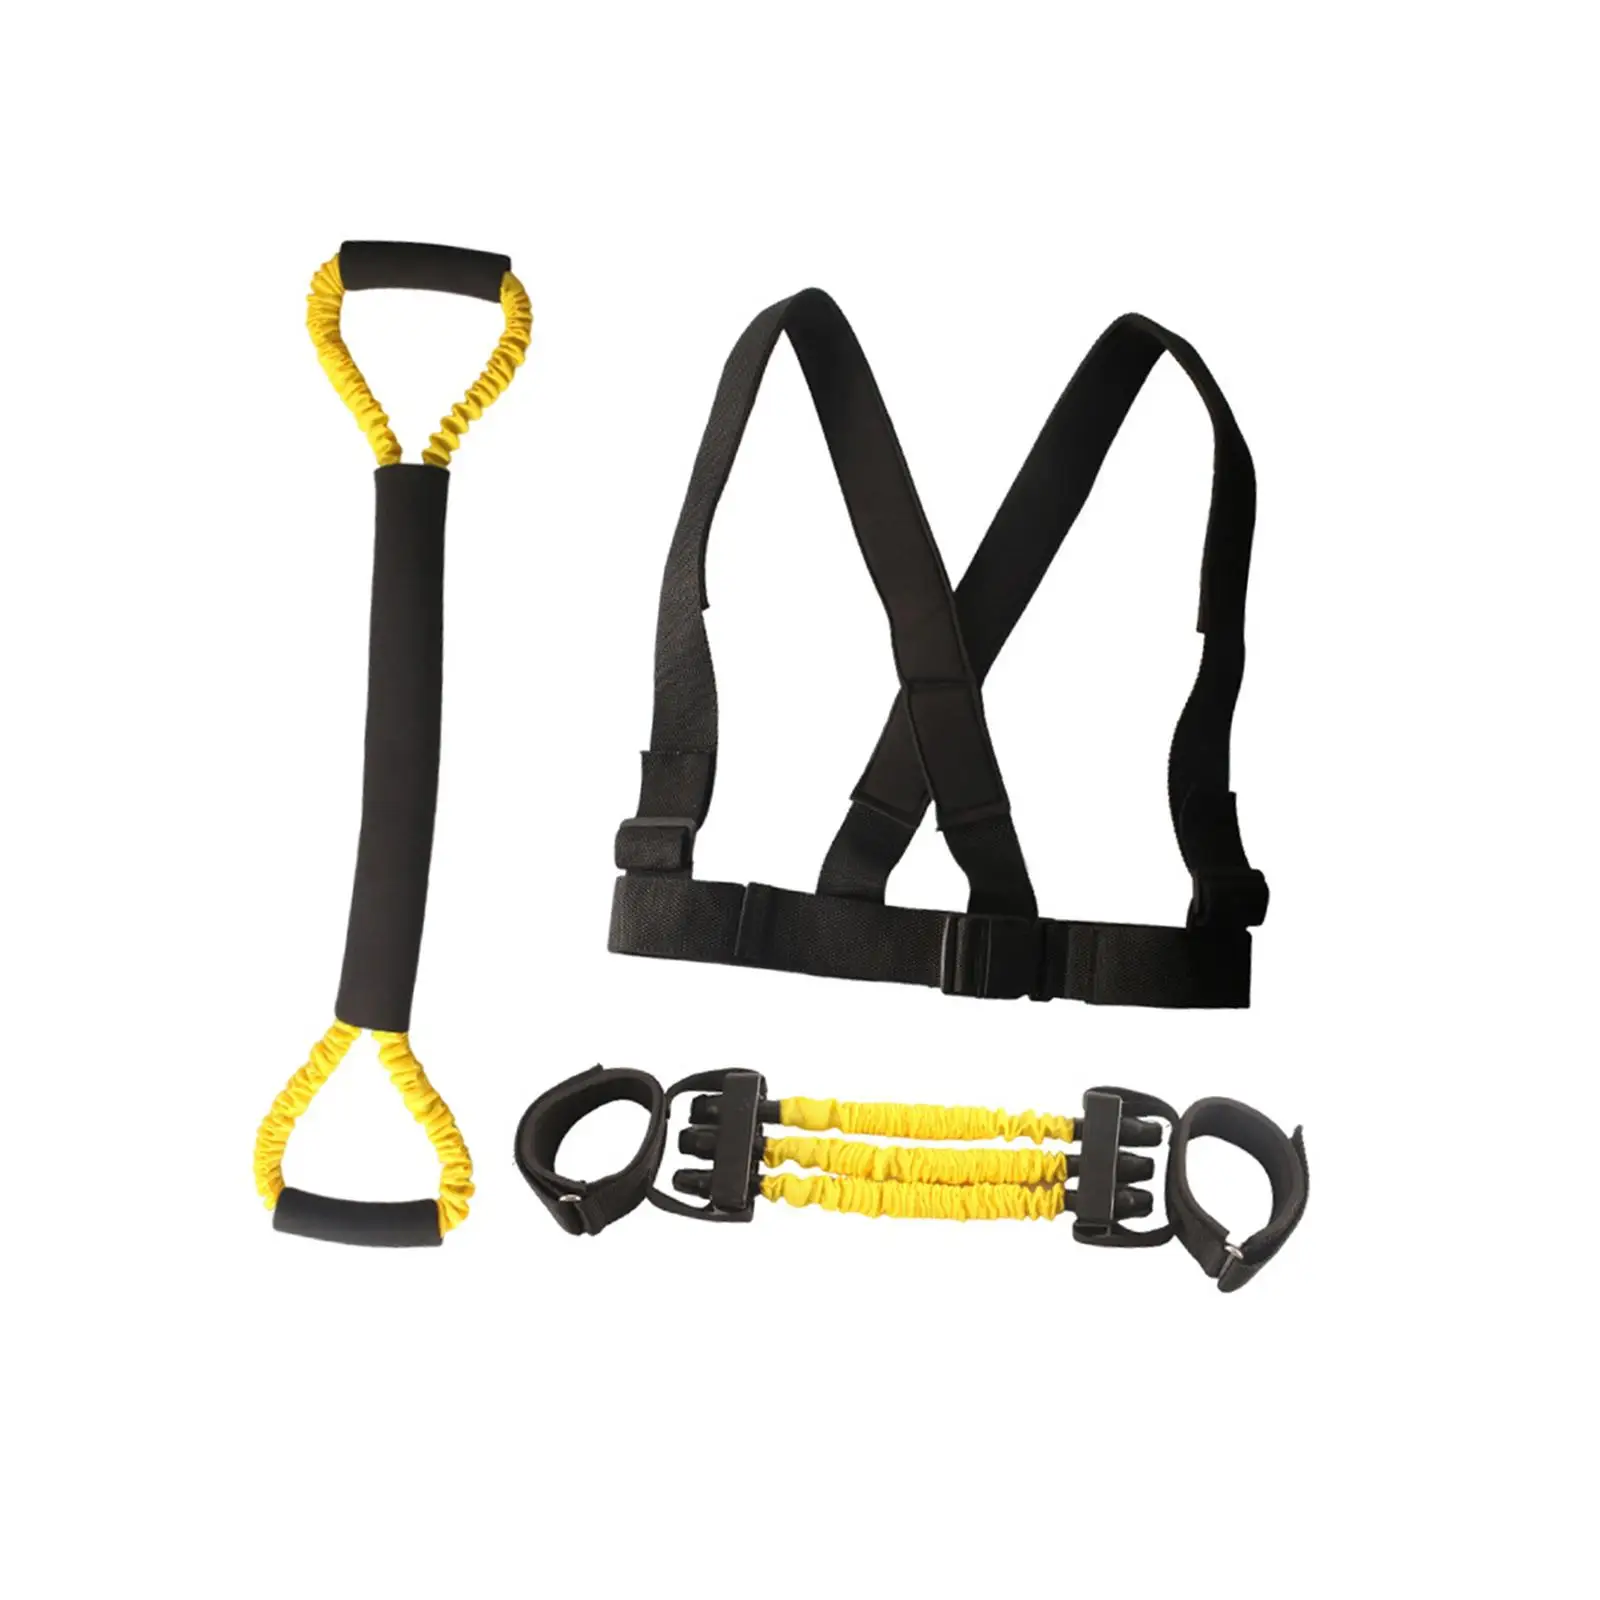 Pulling Rope Fitness Exercise Band Boxing Resistance Bands with Foam Handles for Pilates Football Punching Mma Muscle Building